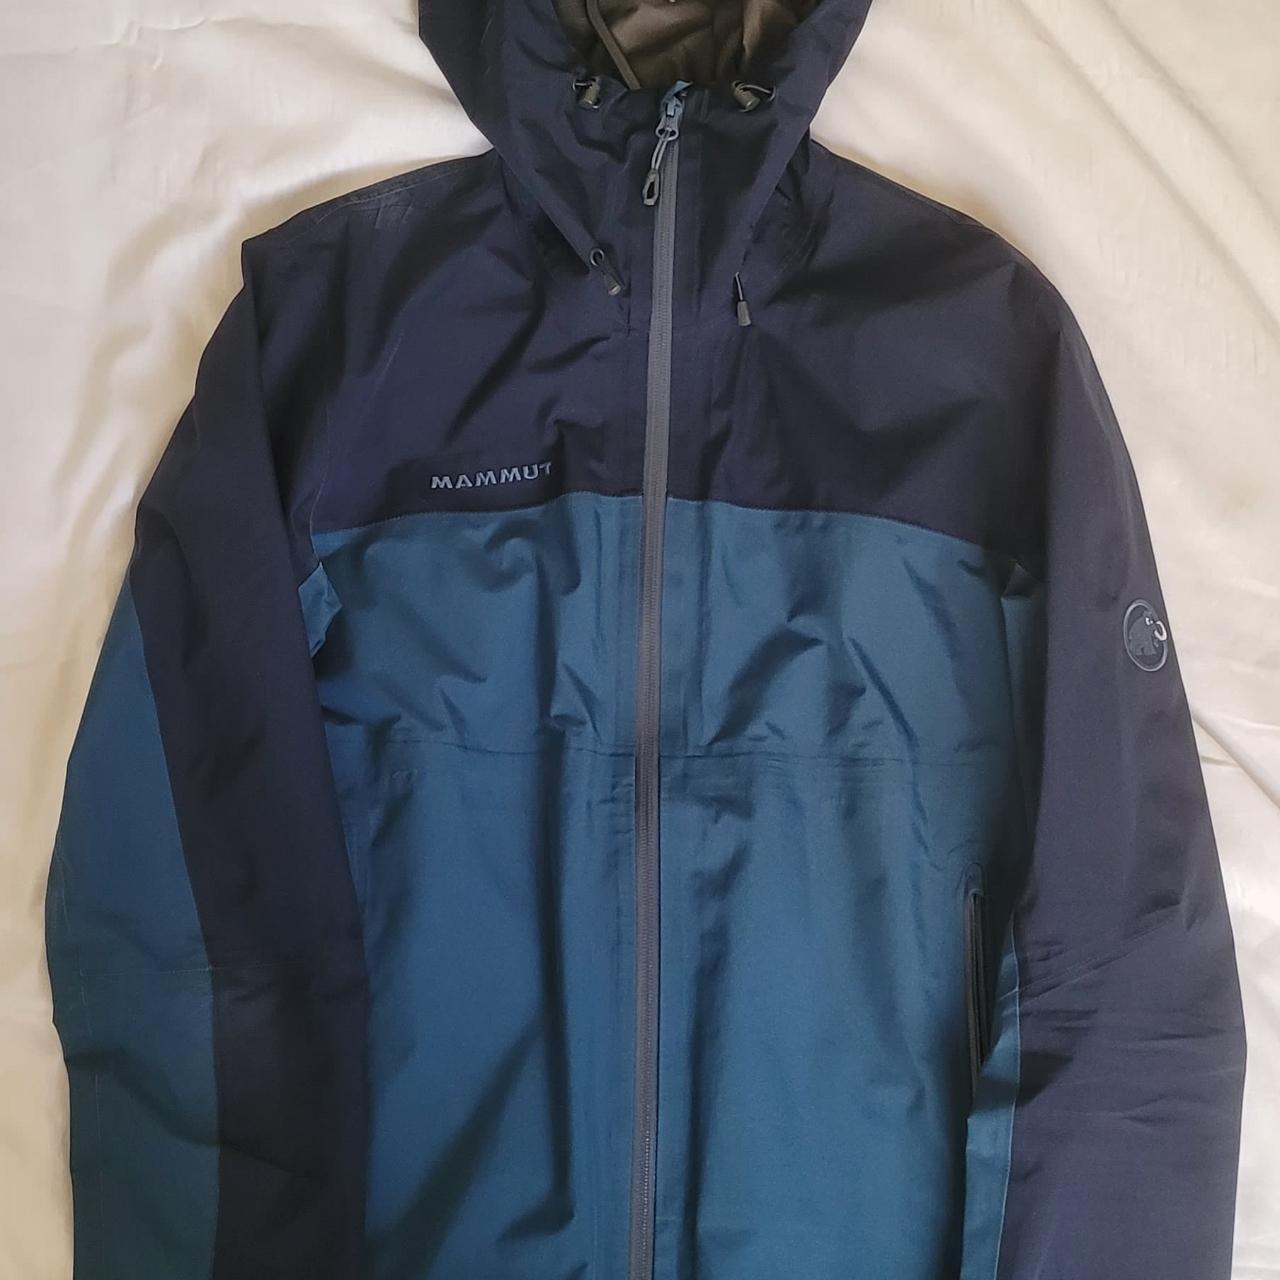 MAMMUT GORE-TEX jacket with similar quality to... - Depop